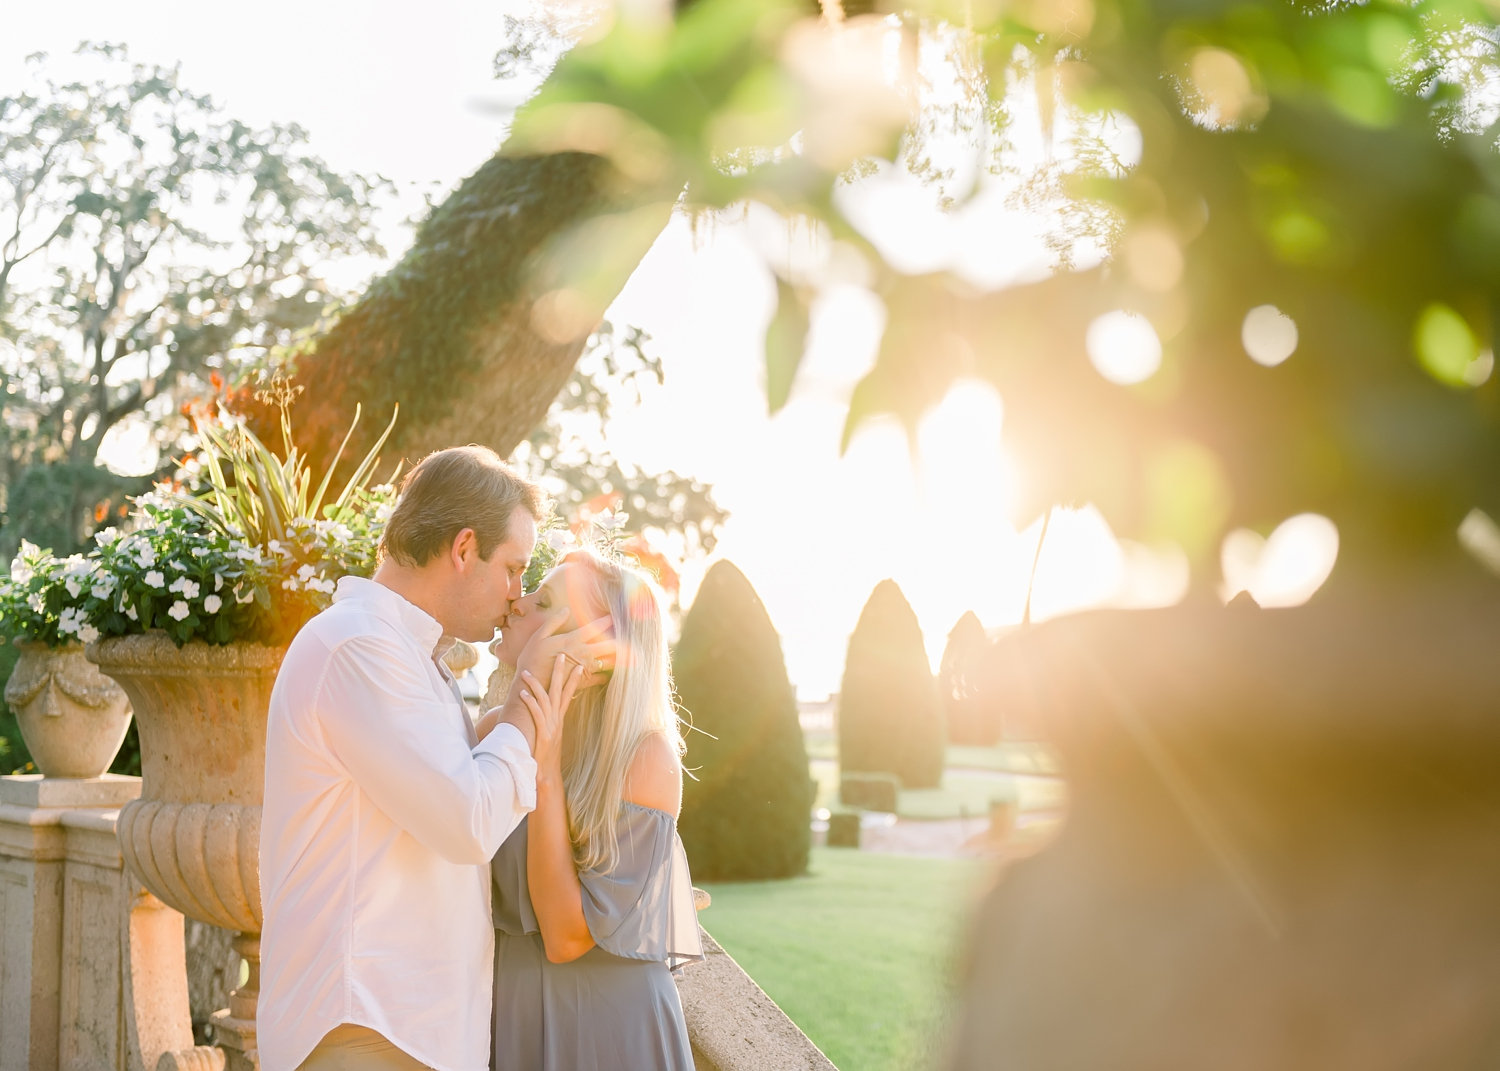 peeking through a large potted plant at a couple kissing with the sun setting behind them